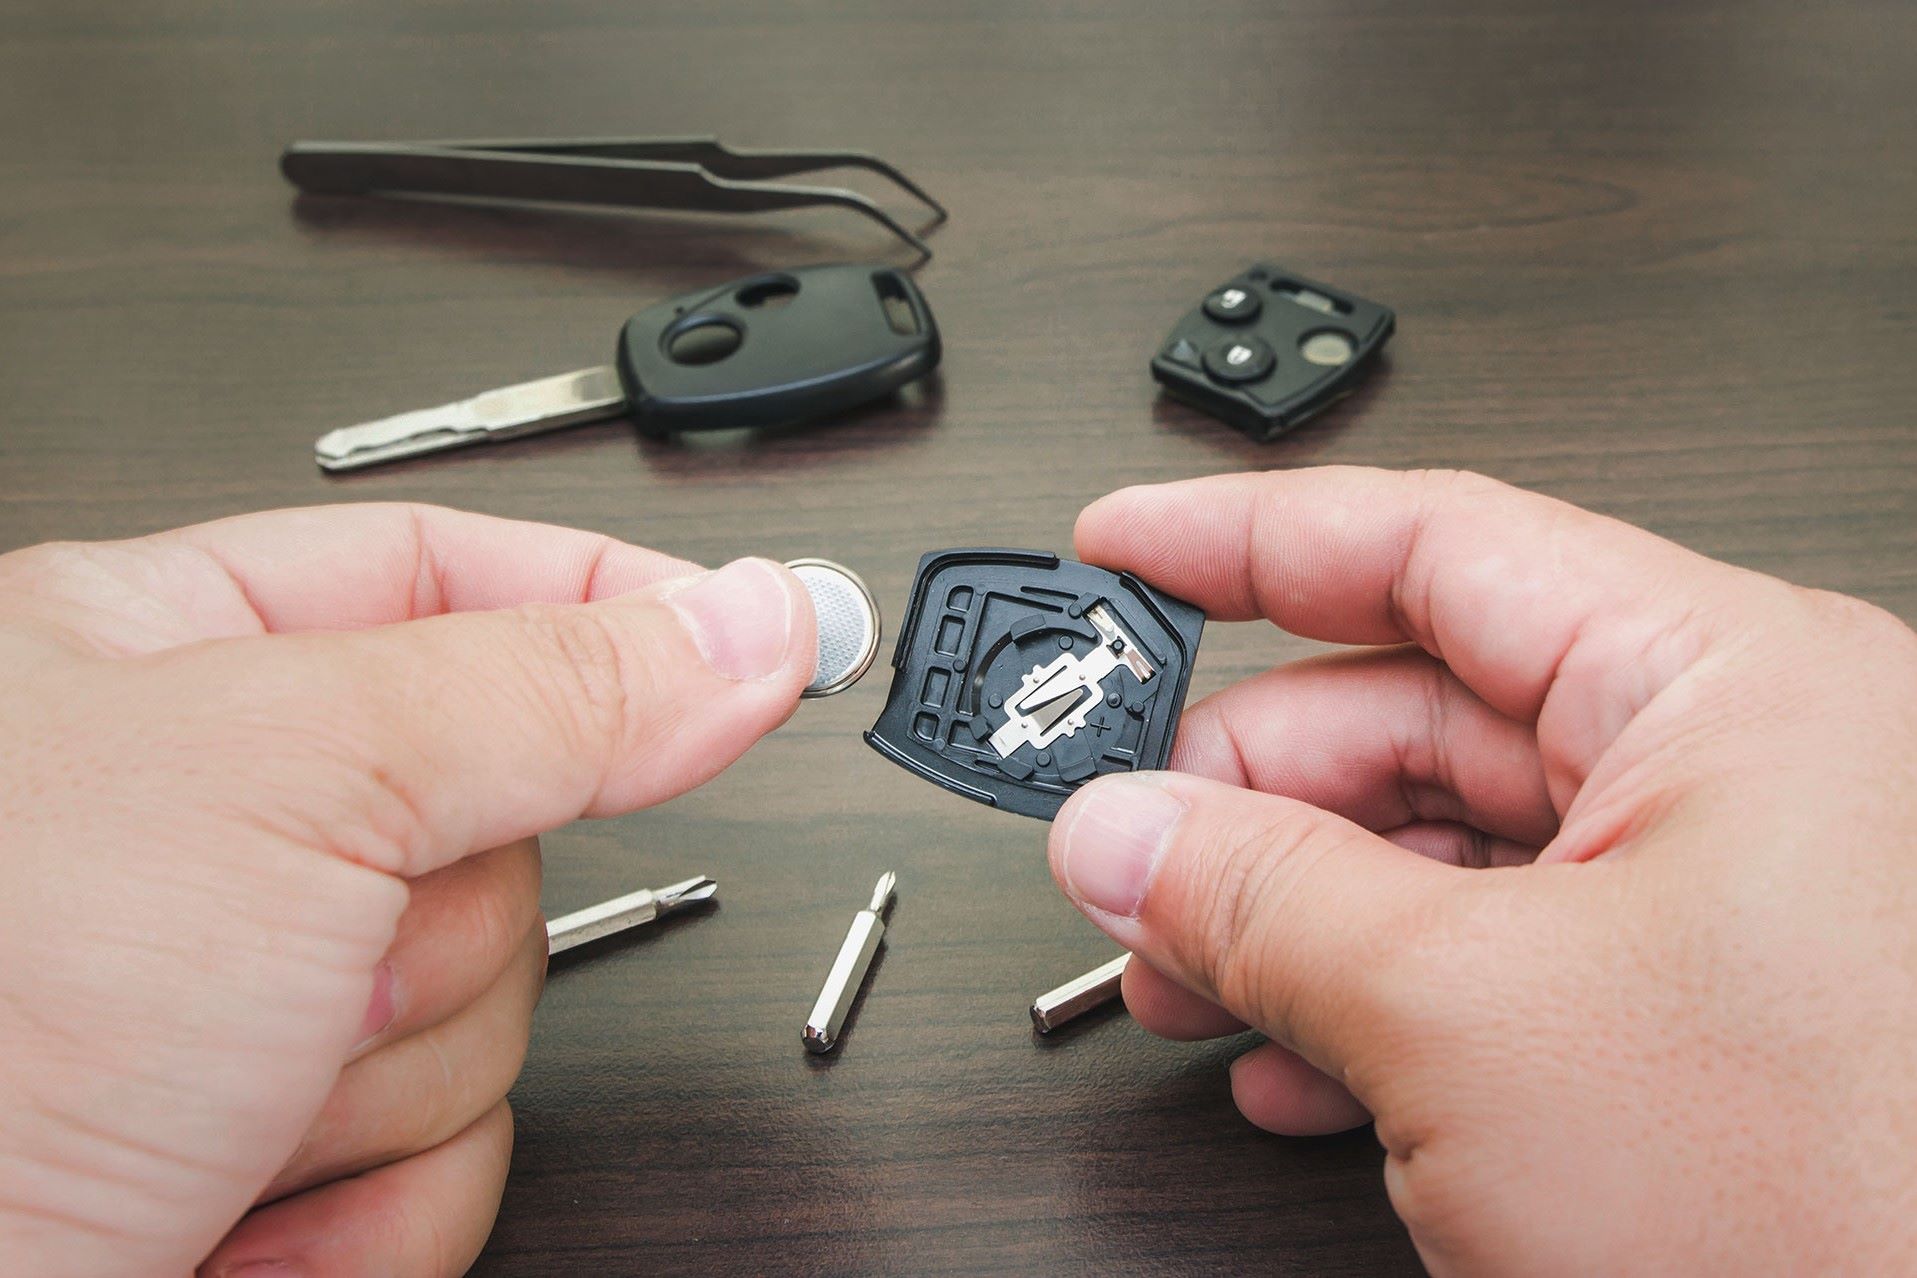 How To Replace Battery In Key Fob